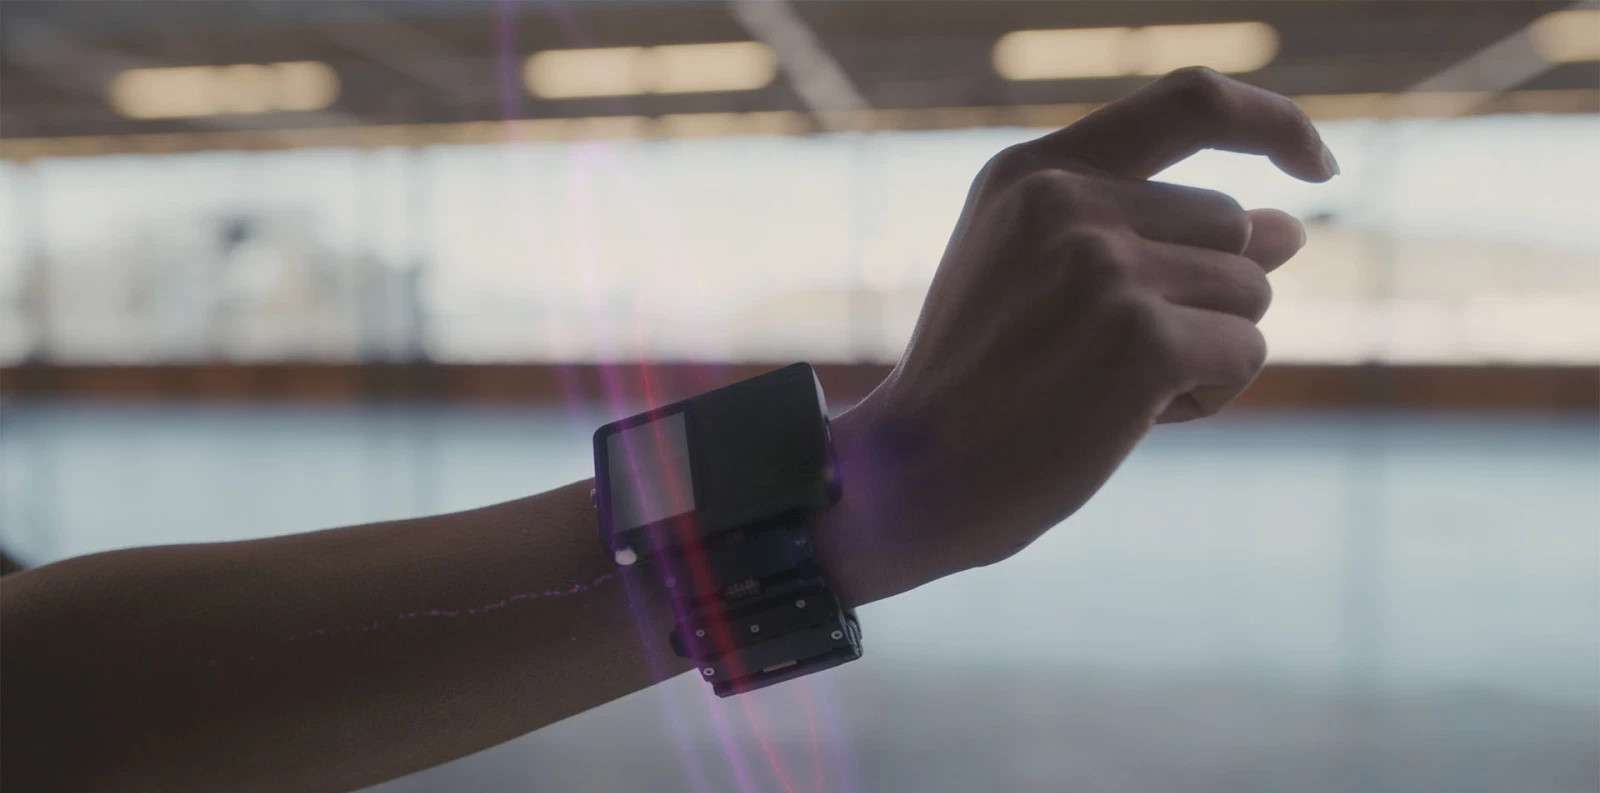 This bracelet will allow you to control objects without touching them!